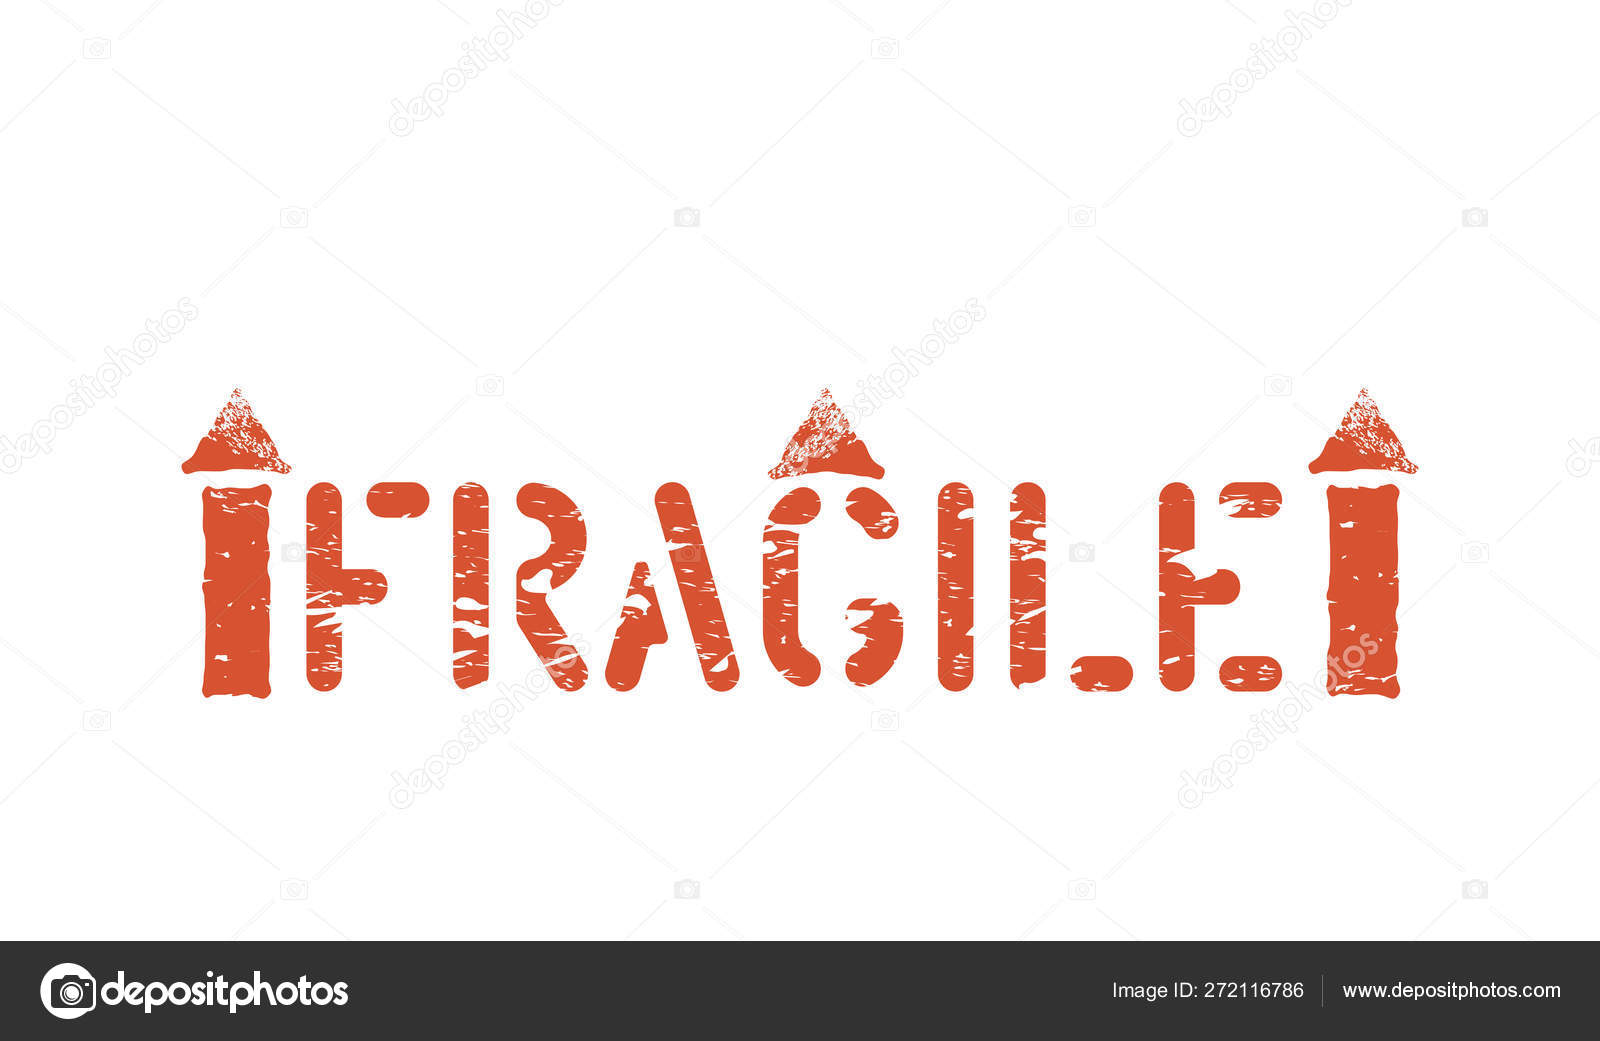 Fragile Stamp Imprint Vector This Way Up Symbol Handle With Care Grungy Box Sign For Cargo Stock Vector C Voinsveta